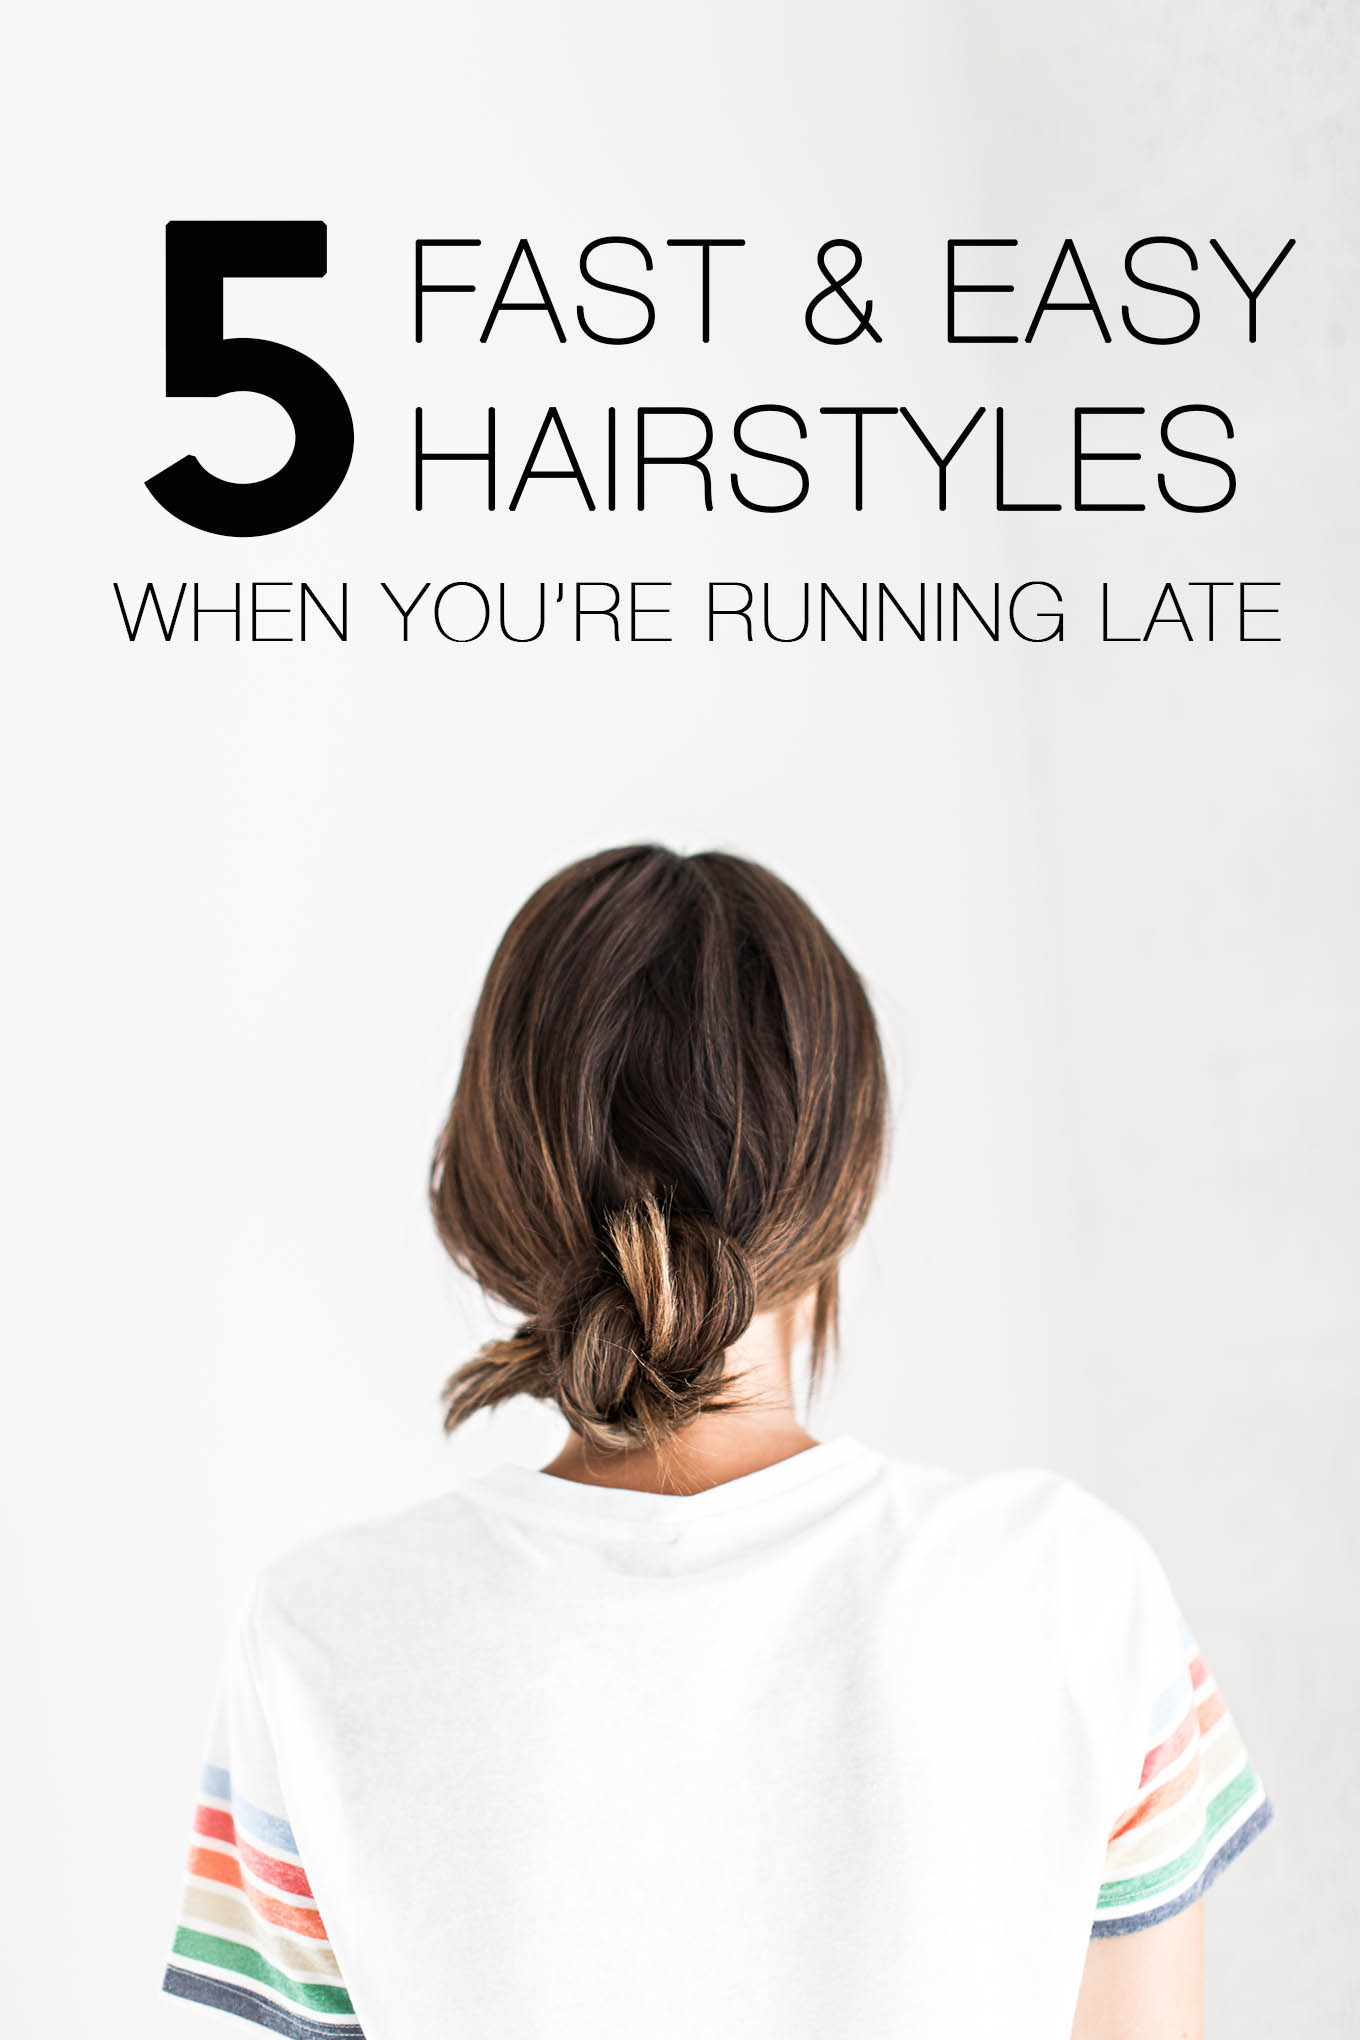 5 Fast & Easy Hairstyle For When You're Running Late | Hello Fashion